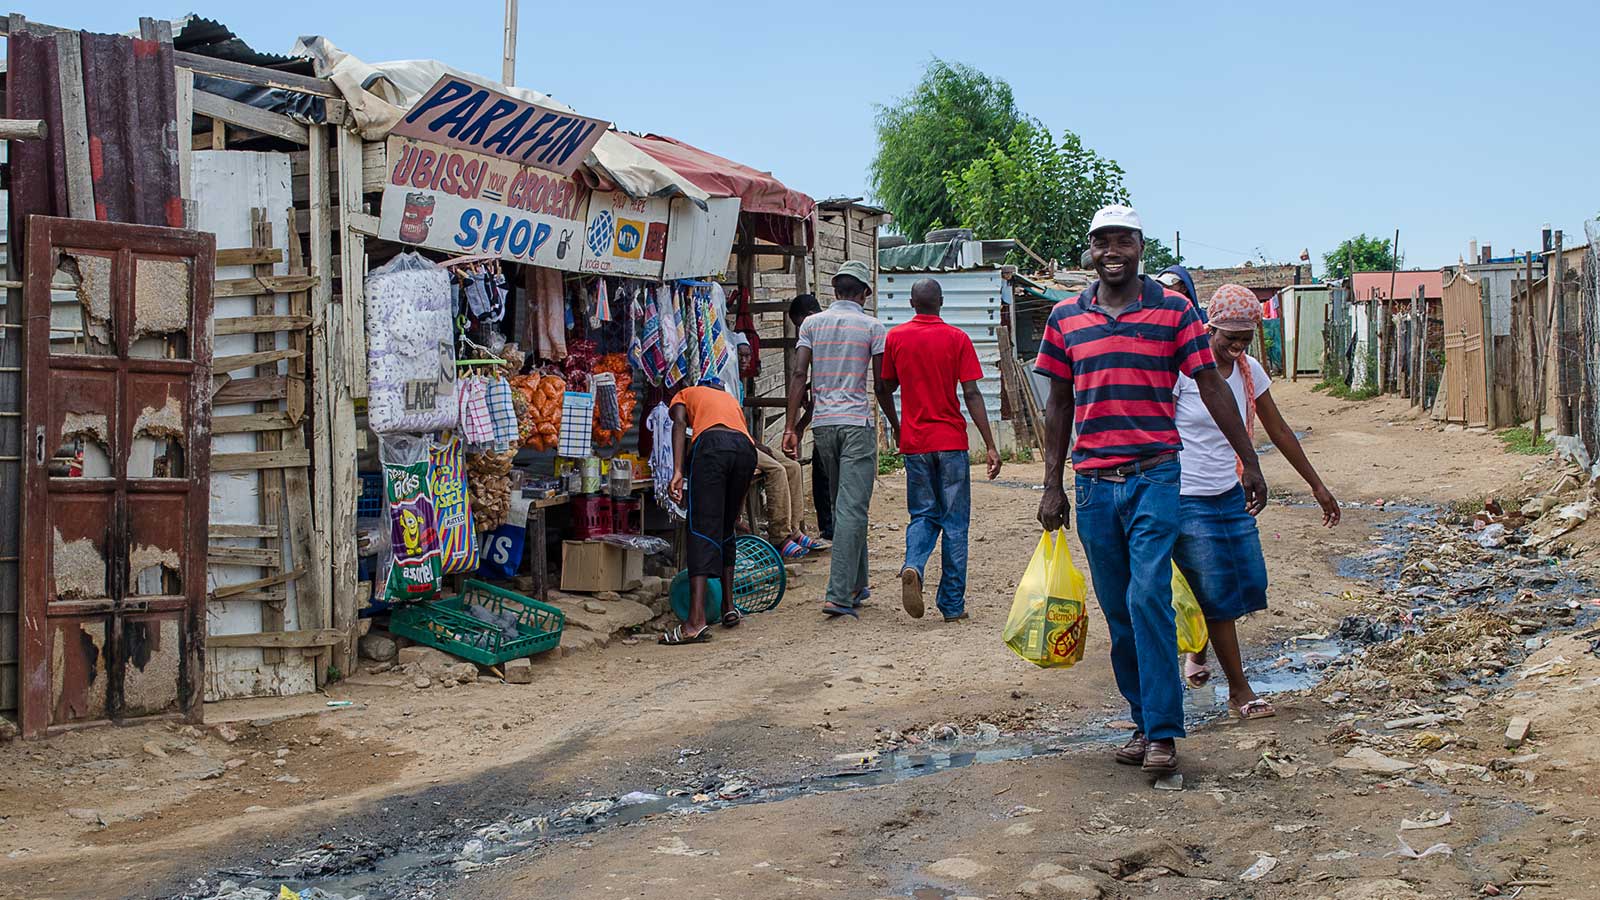 South Africa: The fault-lines of the world’s most unequal society